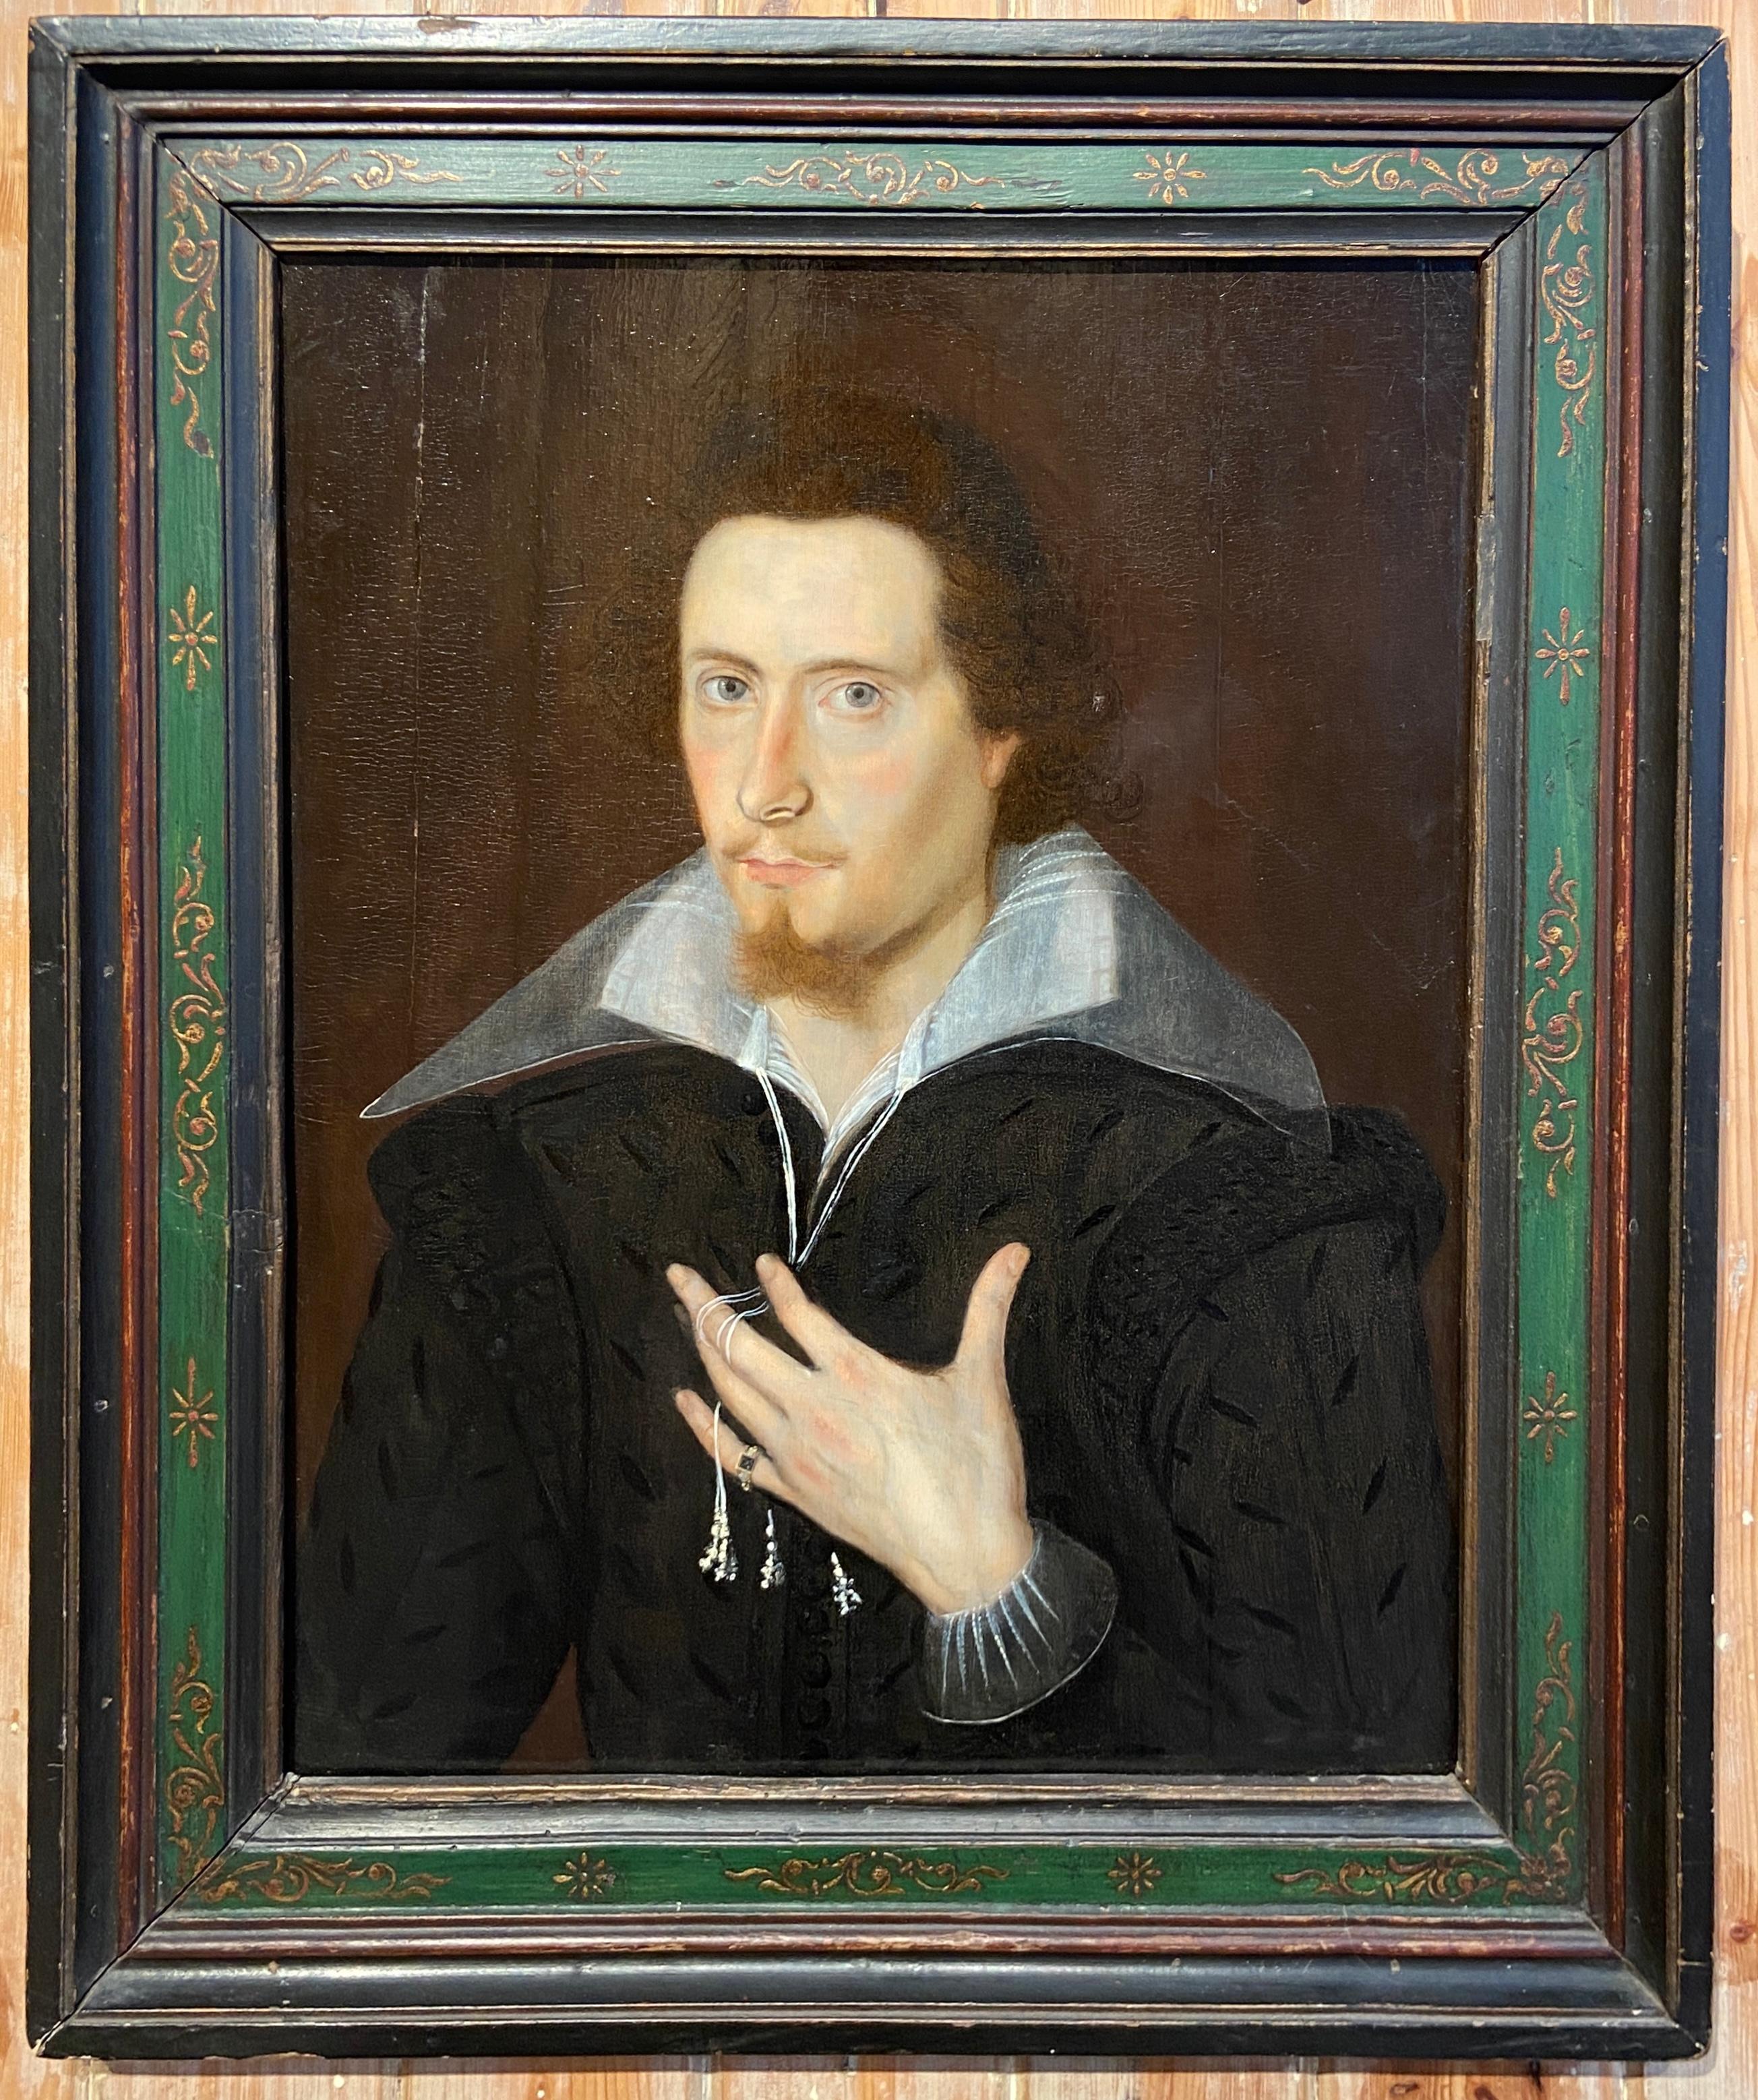 Possible Portrait of William Shakespeare - Painting by Mid 16th Century English School